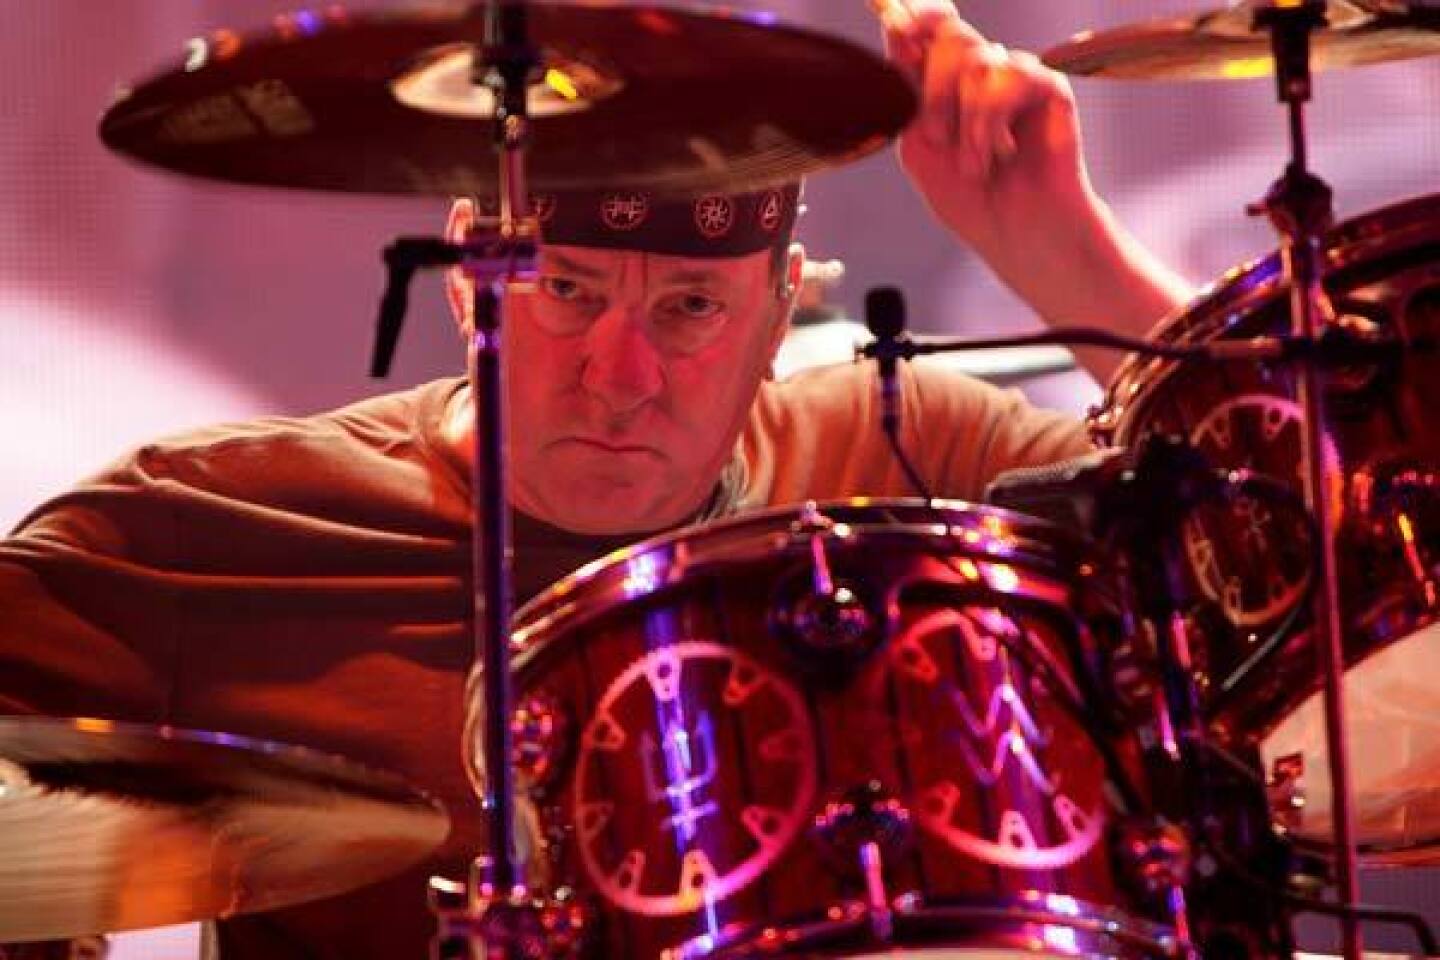 Rush drummer Neil Peart was one of the most accomplished instrumentalists in rock history. Peart often cited swing-era drummers Gene Krupa and Buddy Rich among his primary inspirations, although he also credited Keith Moon, Ginger Baker and John Bonham as major influences. He was 67.